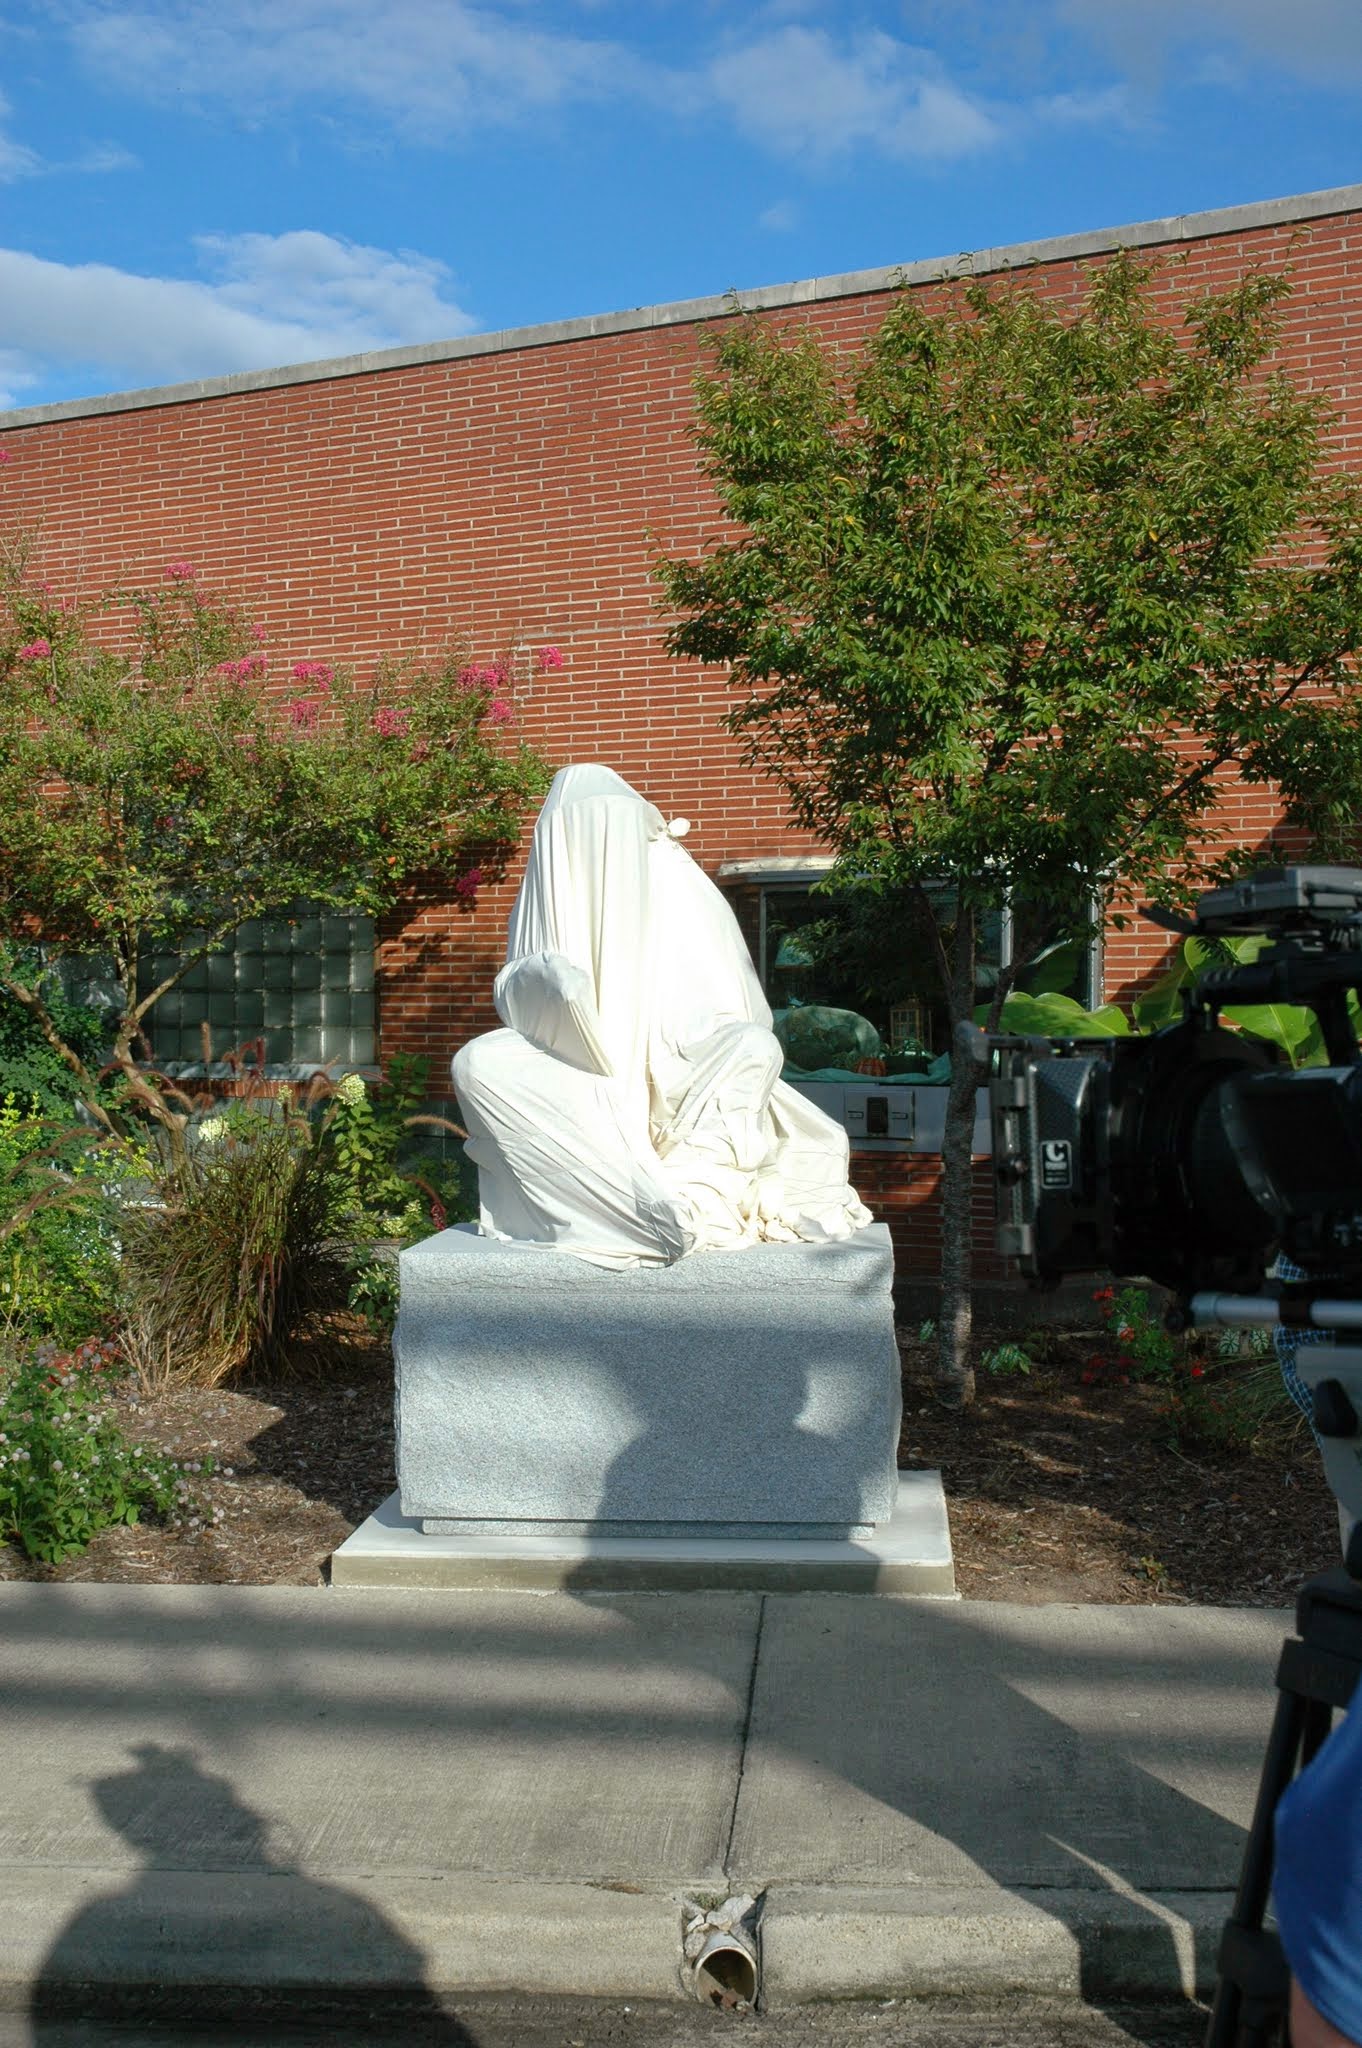 The sculpture wrapped prior to unveiling